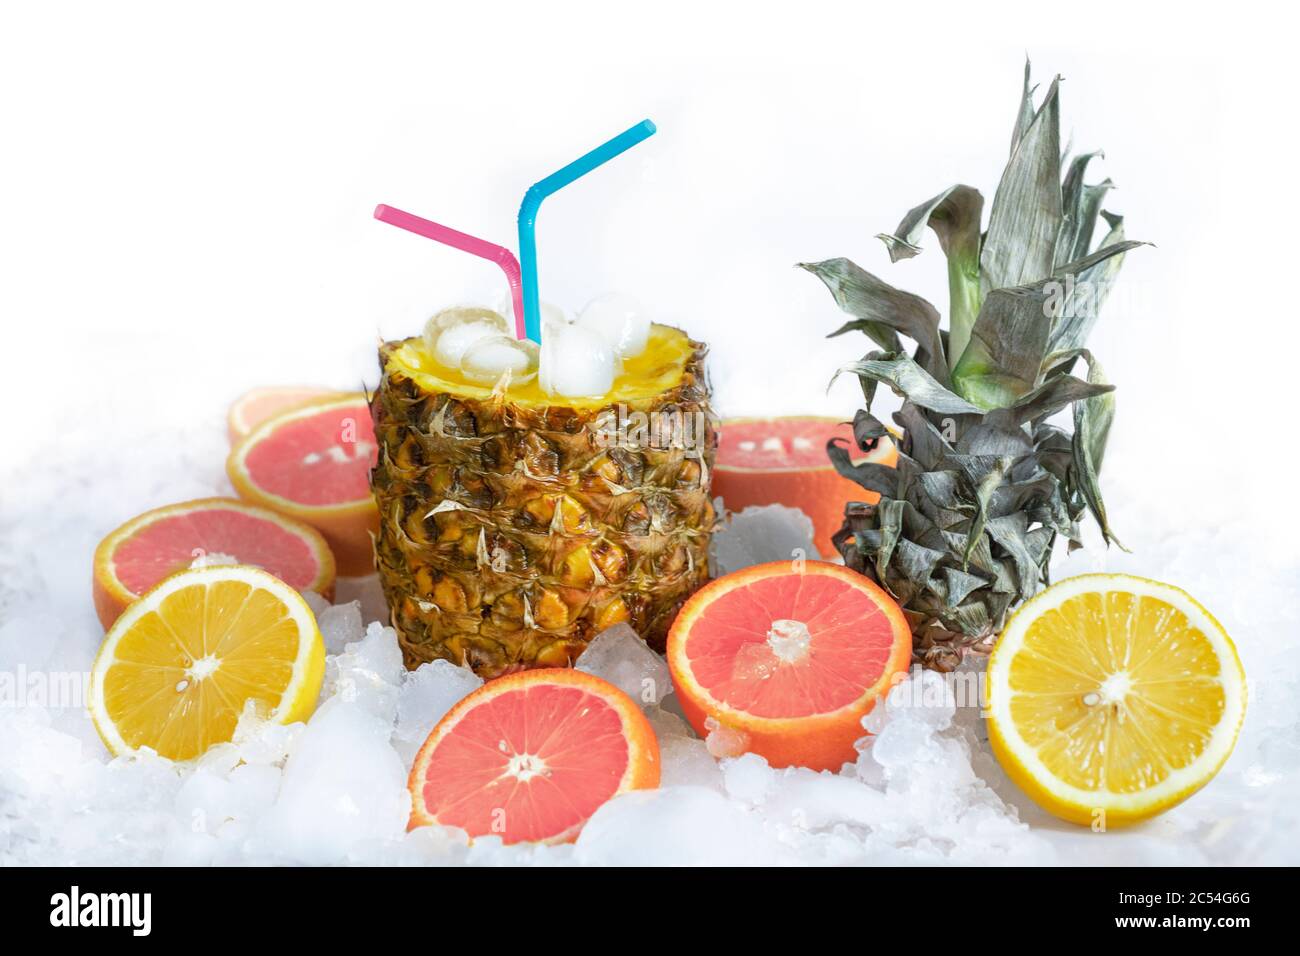 https://c8.alamy.com/comp/2C54G6G/fruit-cocktail-in-pineapple-with-juice-and-a-straw-stands-on-ice-next-to-it-lies-a-lemon-and-an-orange-2C54G6G.jpg